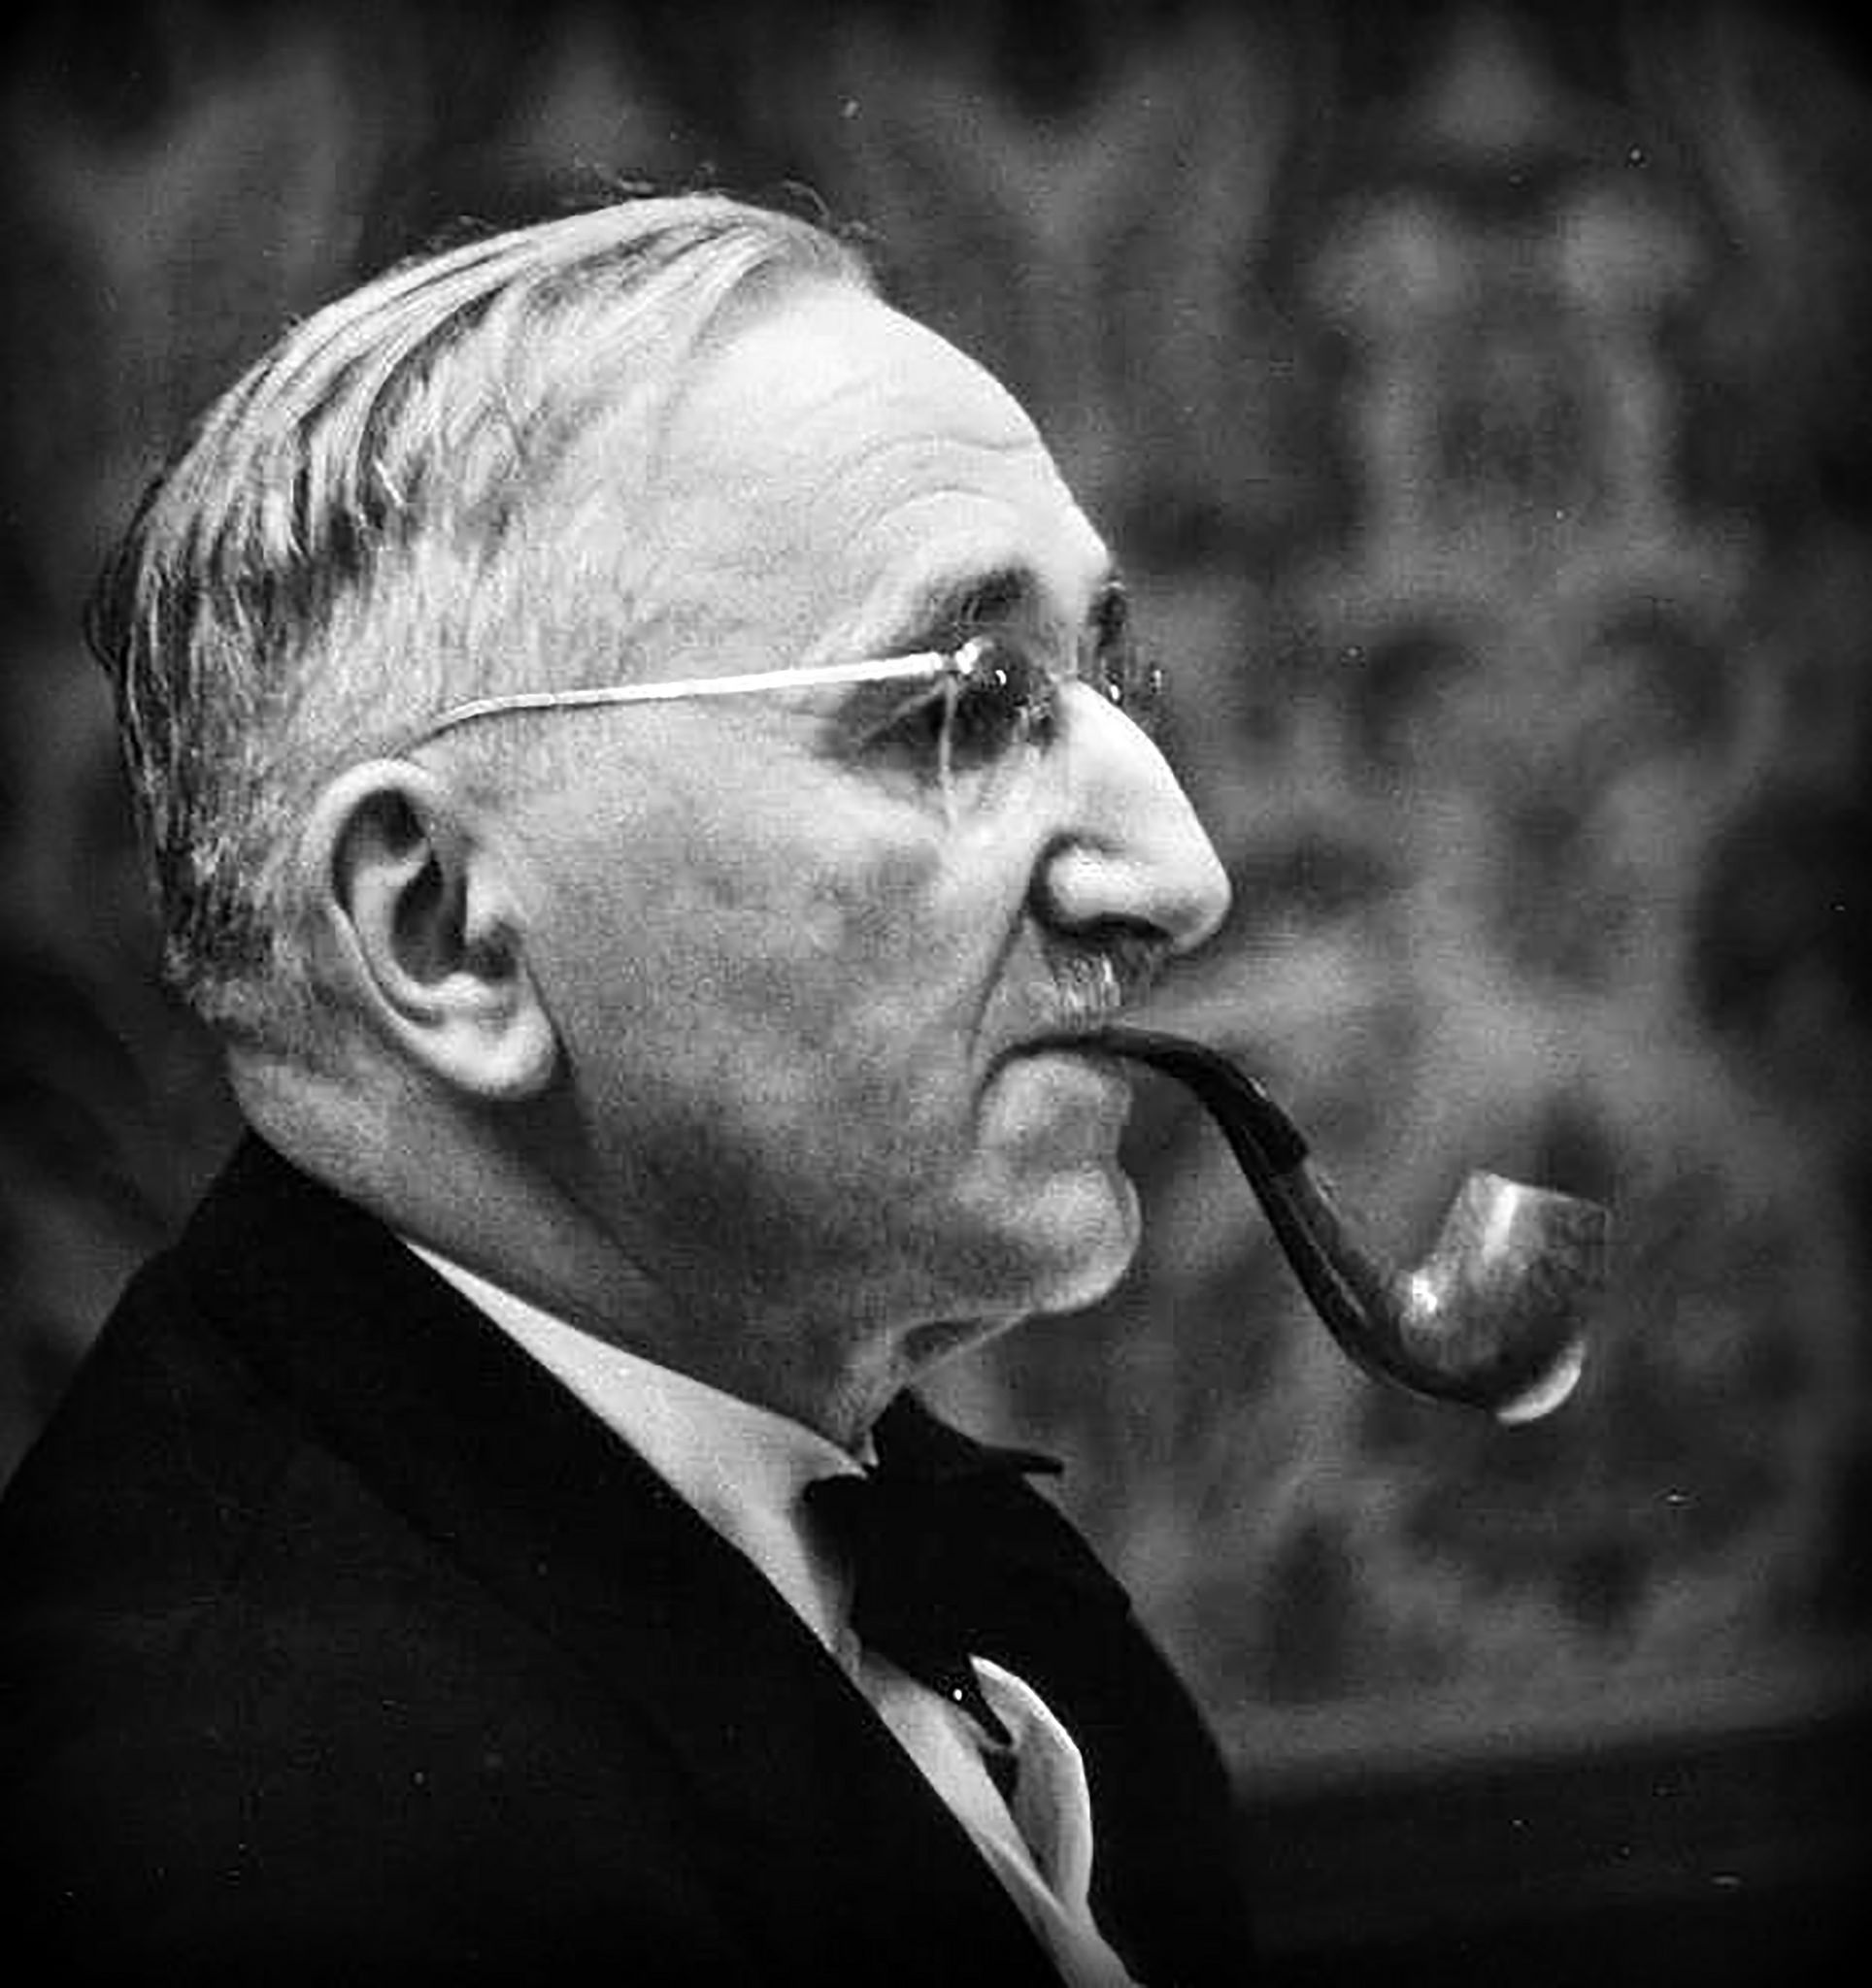 Hayek with pipe